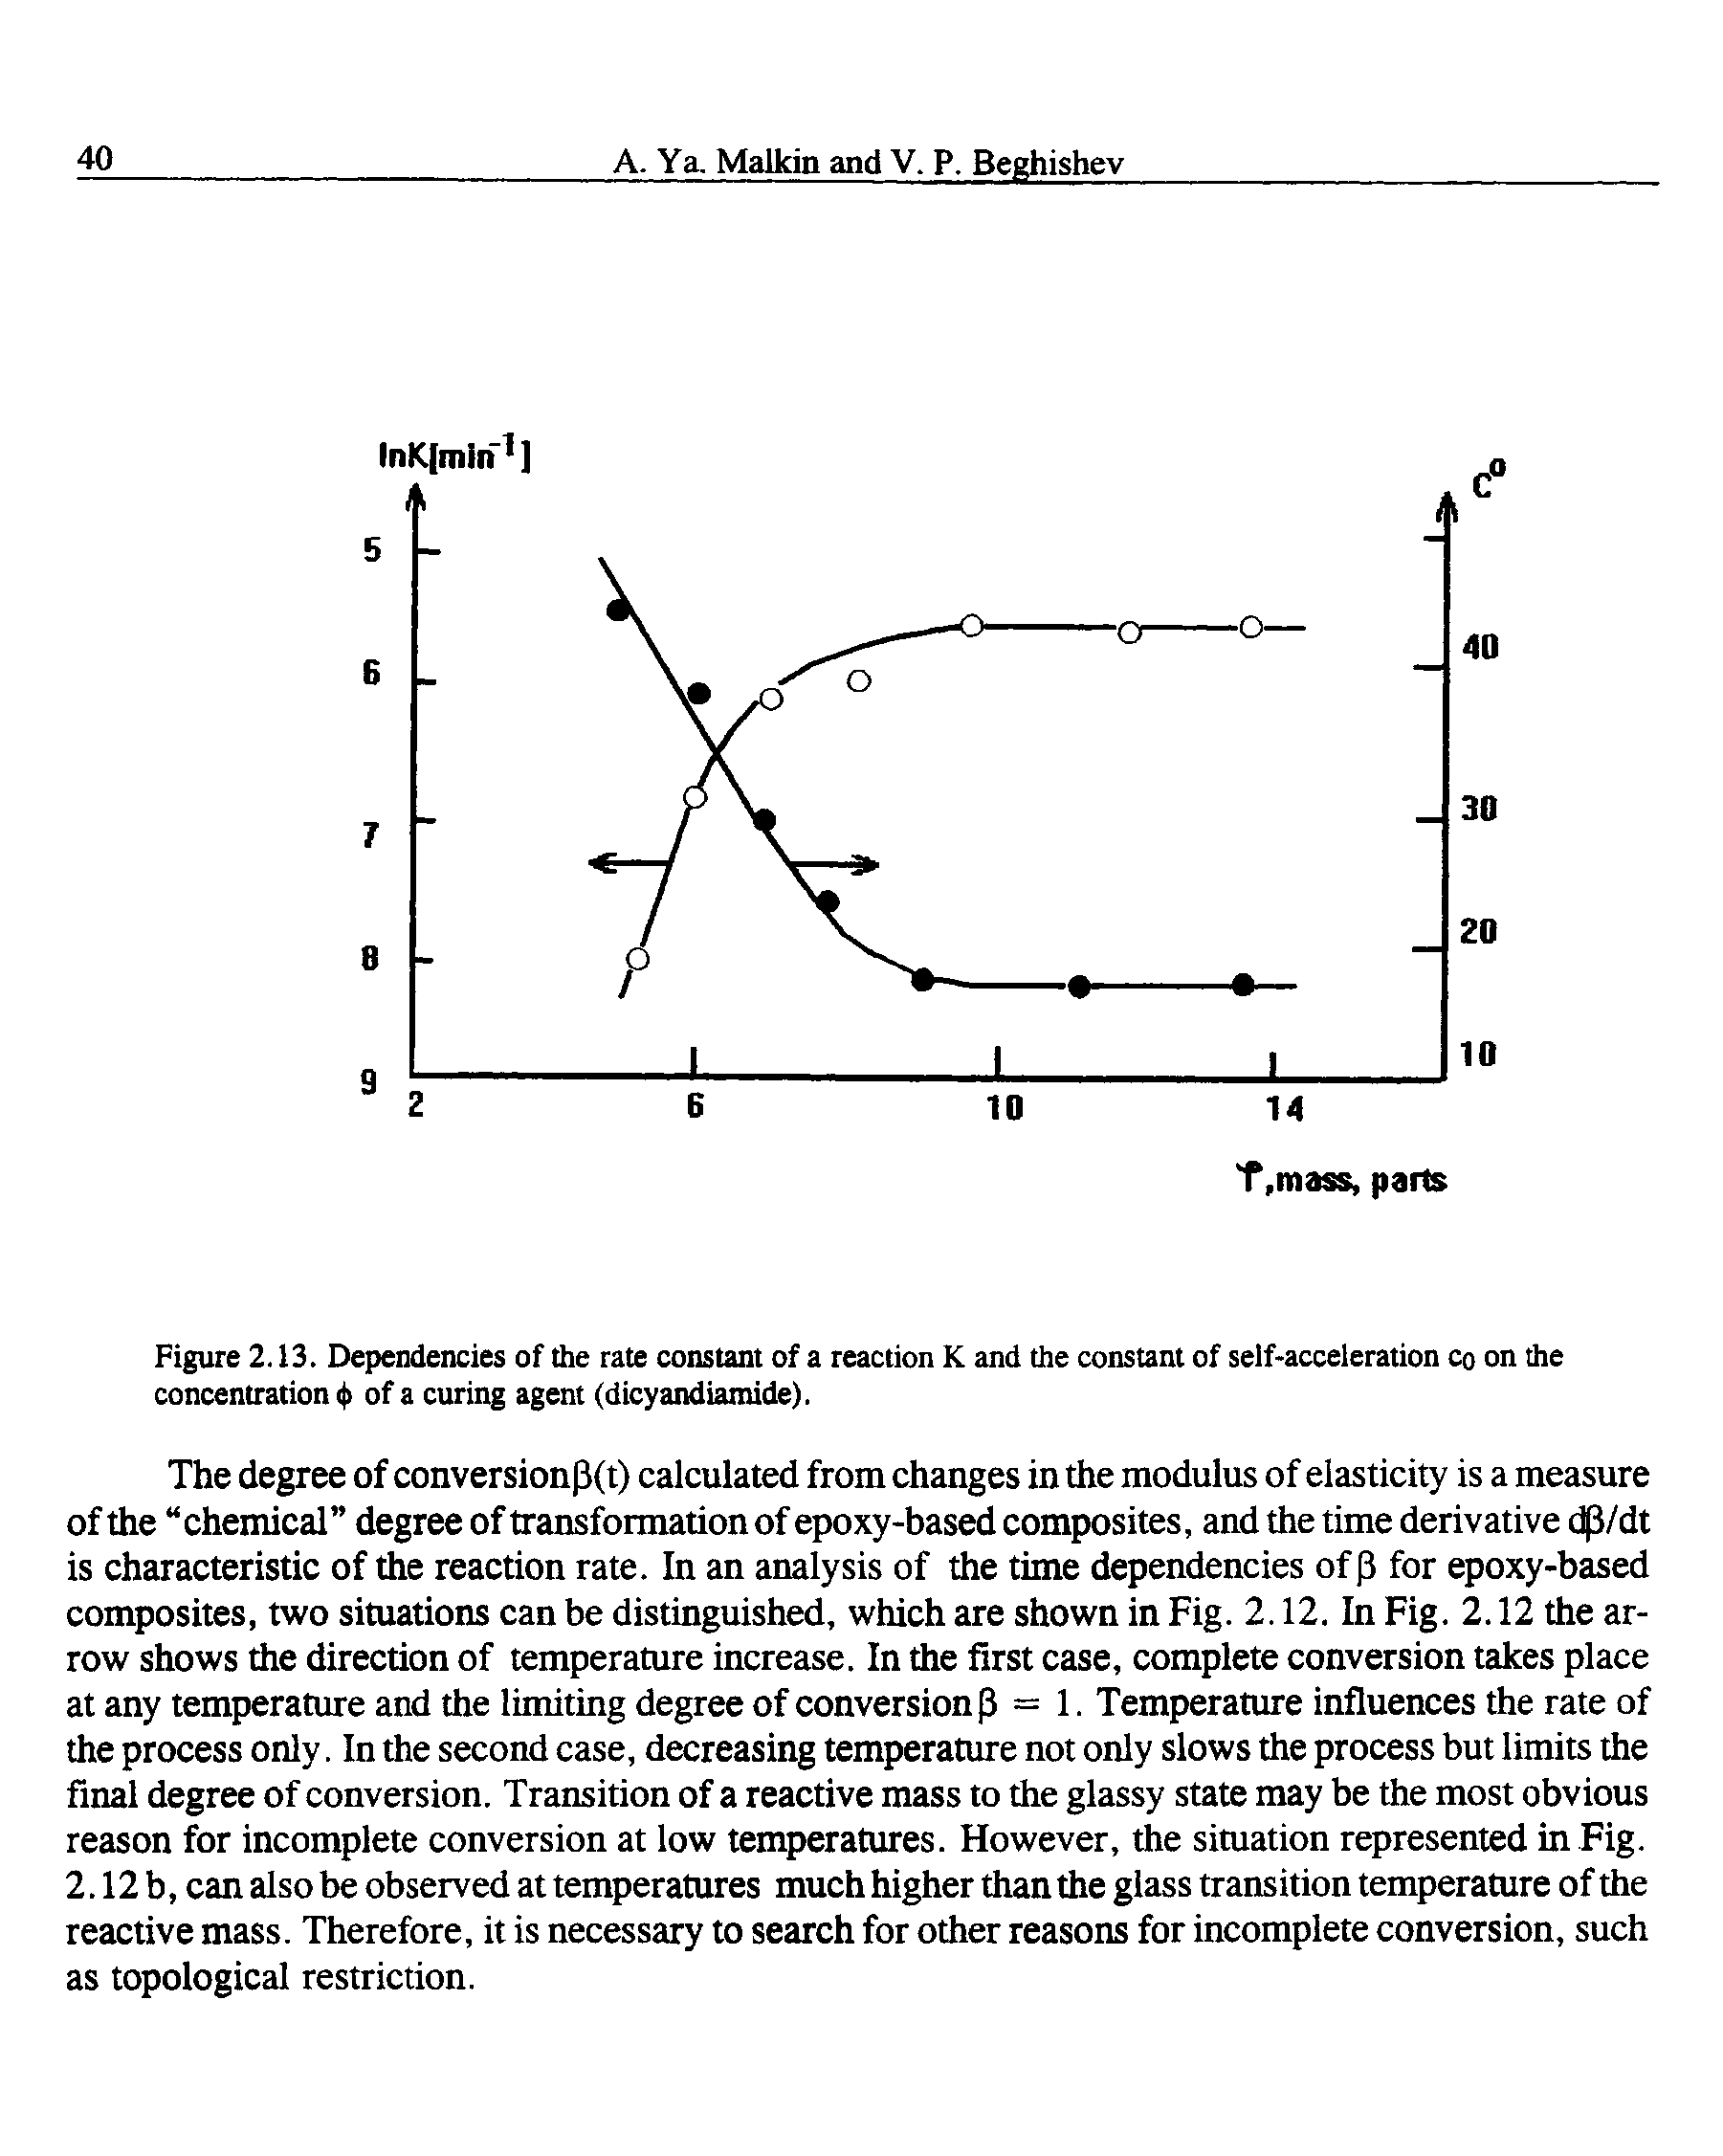 Figure 2.13. Dependencies of the rate constant of a reaction K and the constant of self-acceleration co on the concentration <t> of a curing agent (dicyandiamide).